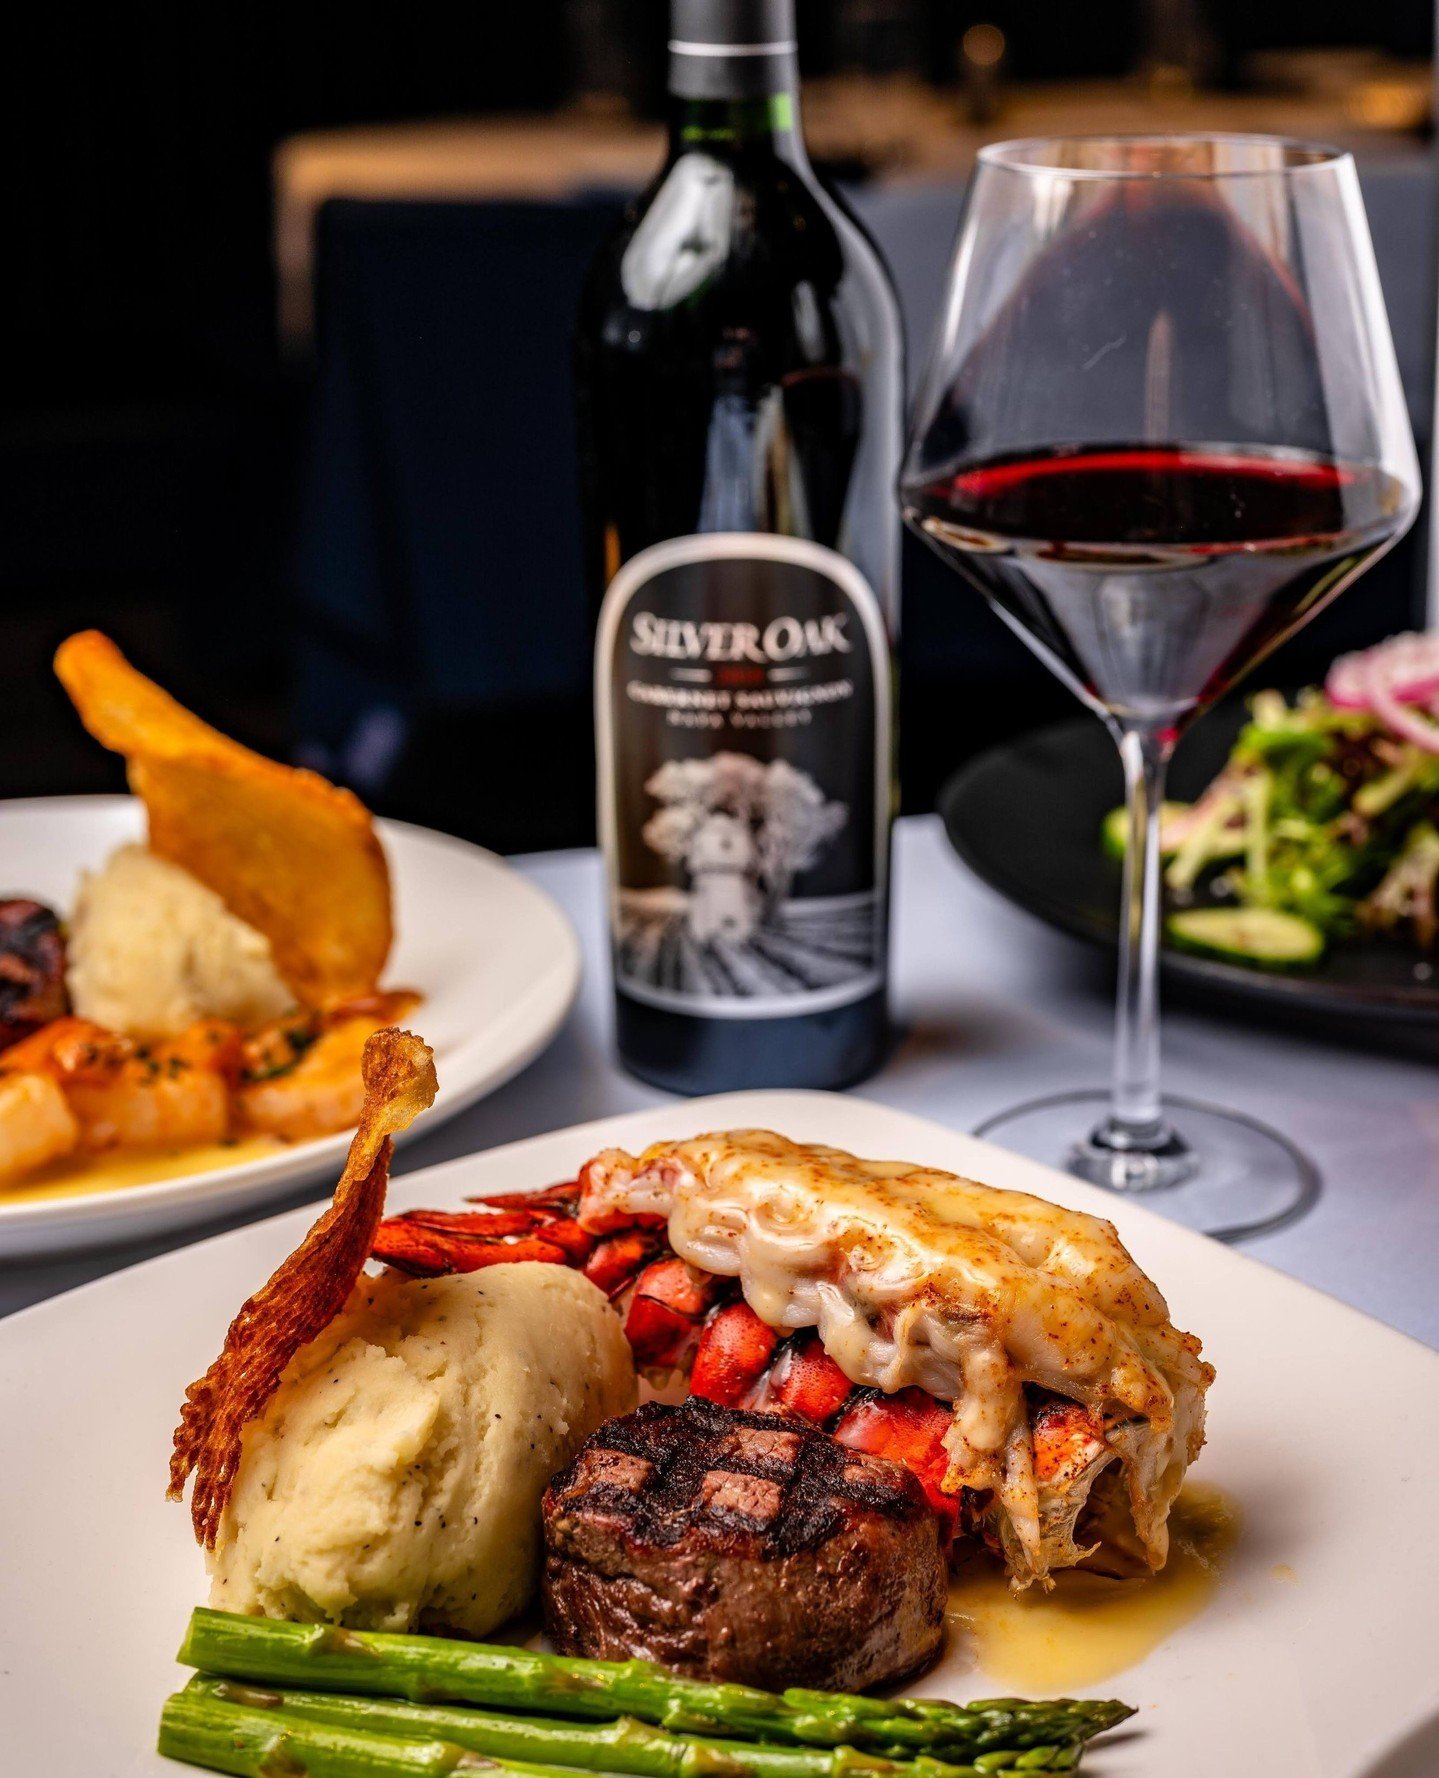 Our Mixed Grill Prix Fixe and a bold red, how could you resist!? 🍷 🥩 🦞